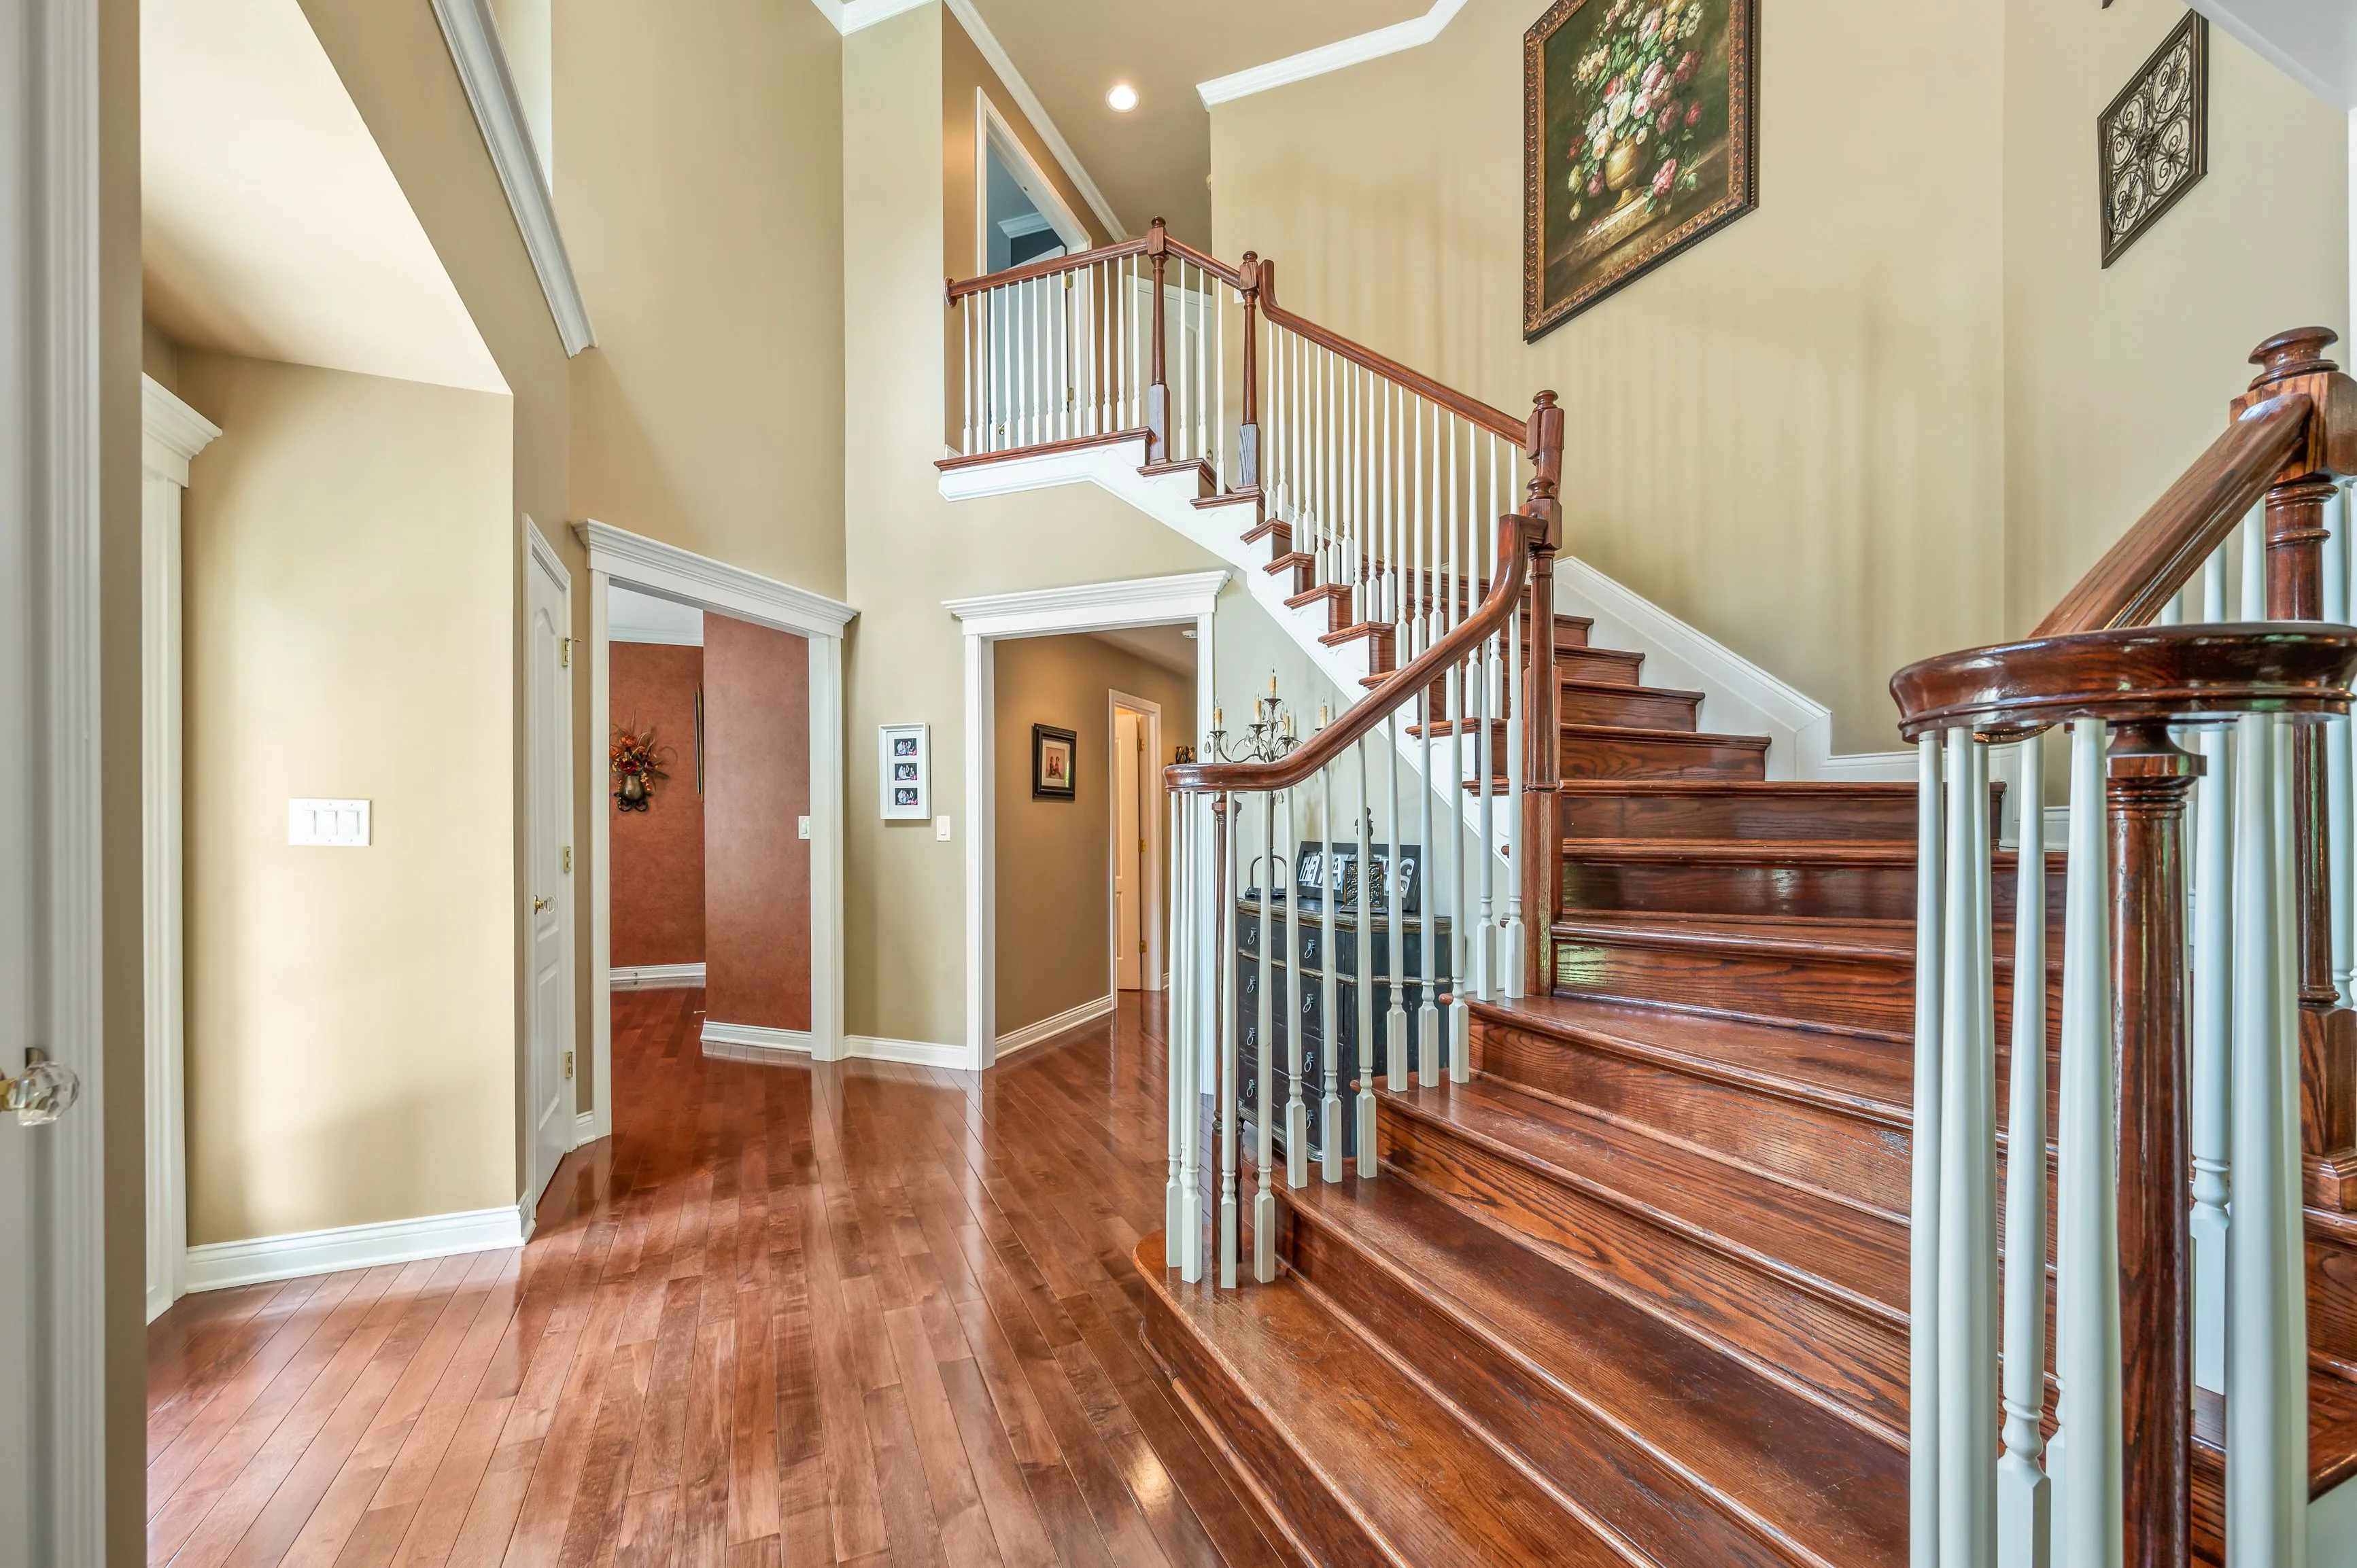 Elegant home interior with wooden staircase and floors, beige walls, and multiple doorways.